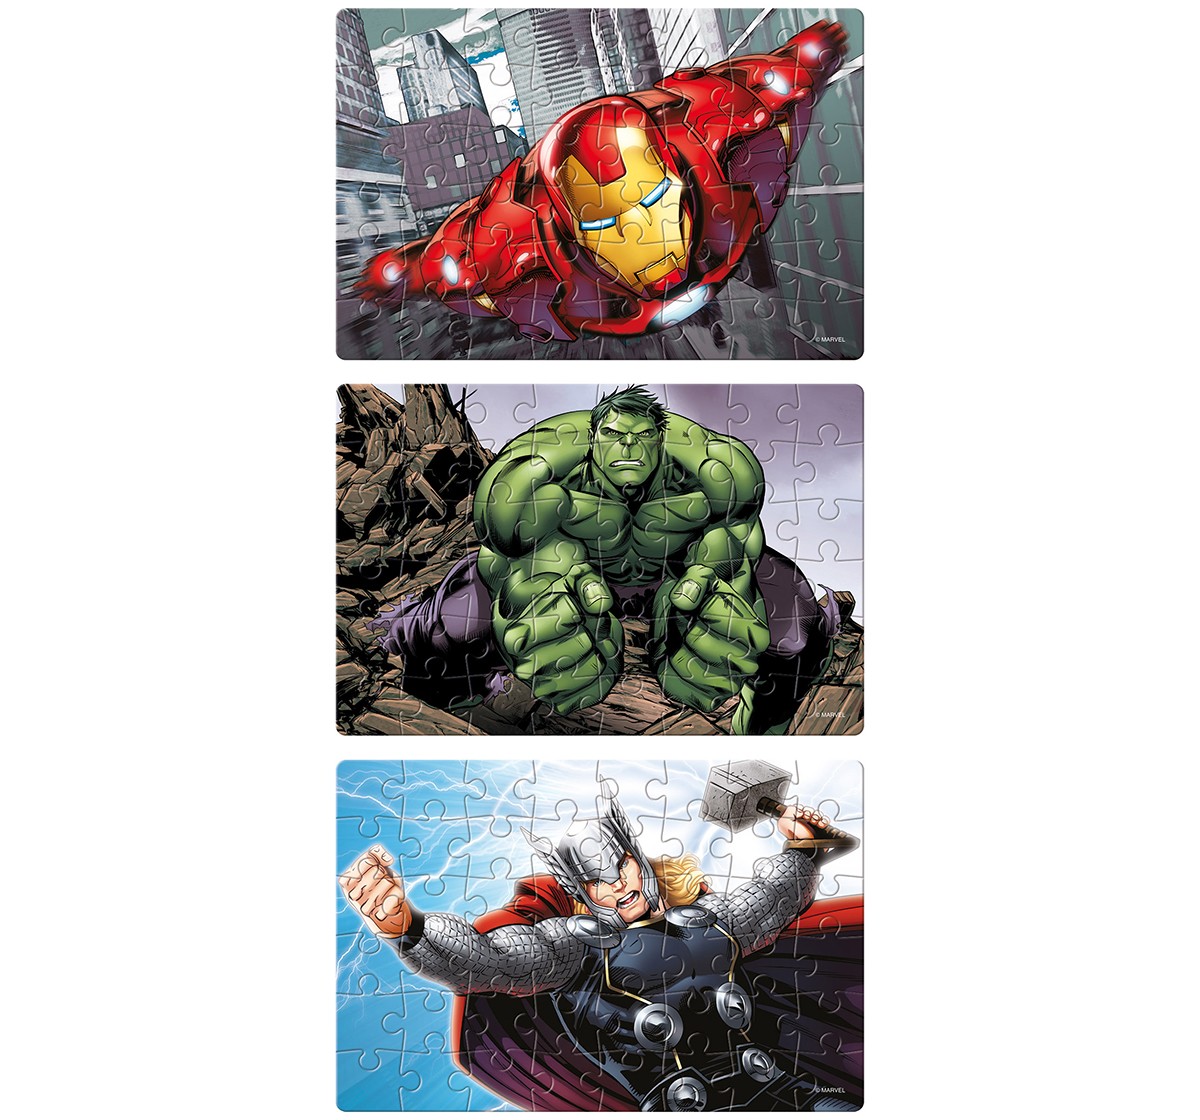 Disney Avengers 3 In 1 Activity Puzzle Set for Kids Age 5Y+